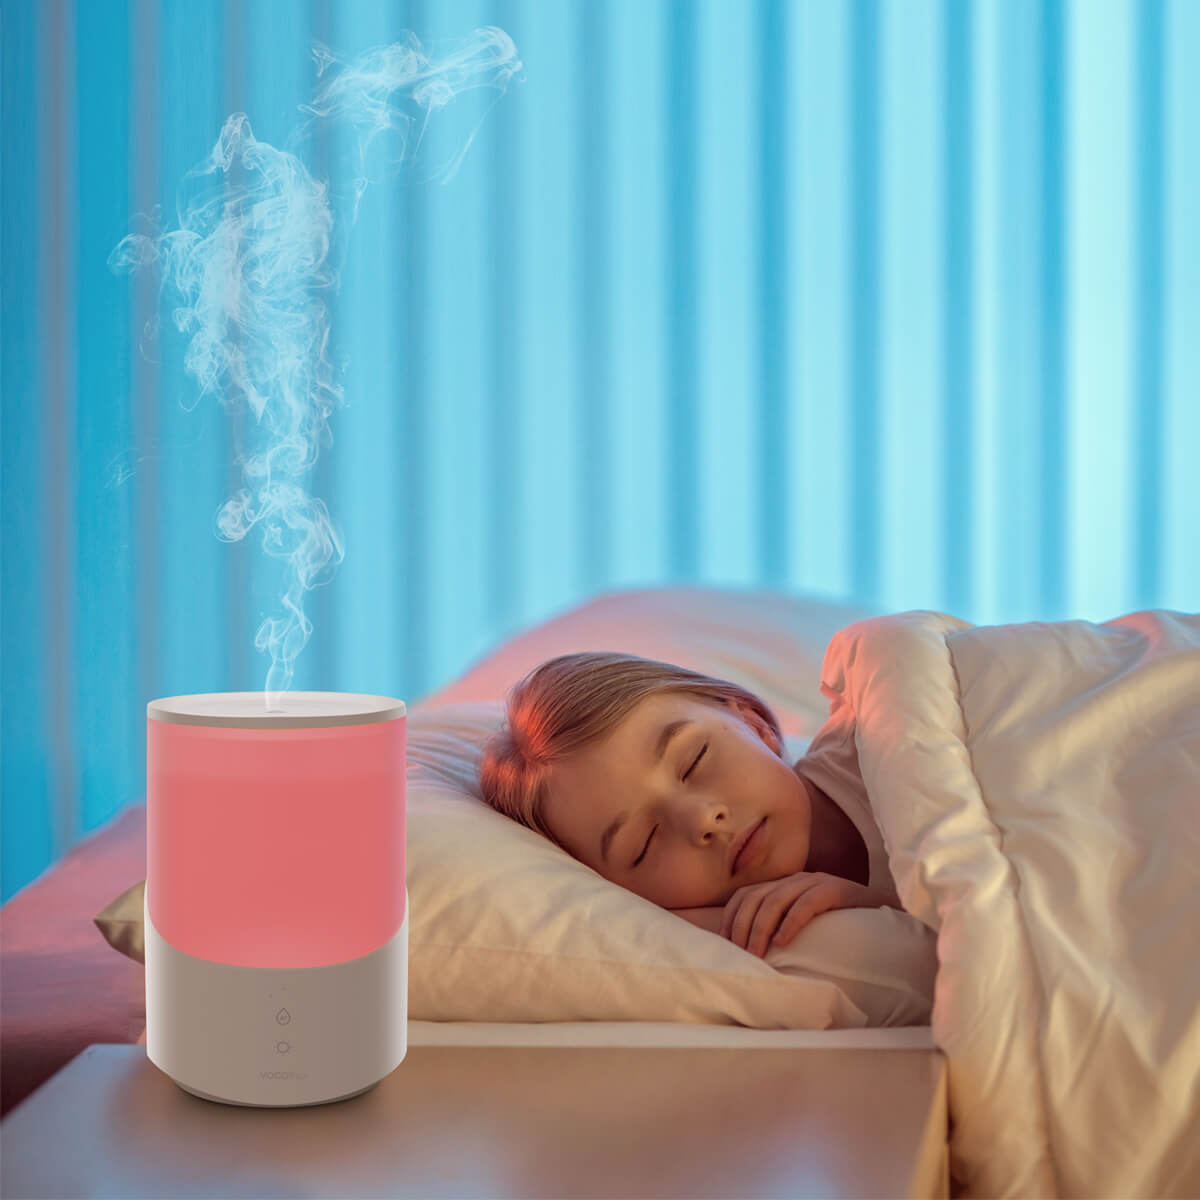 Auto-target Humidity mode helps you keep the humidity in your room at optimal levels, which can make the air feel balanced and improve breathing and sleep, as well as nasal congestion & dry skin.